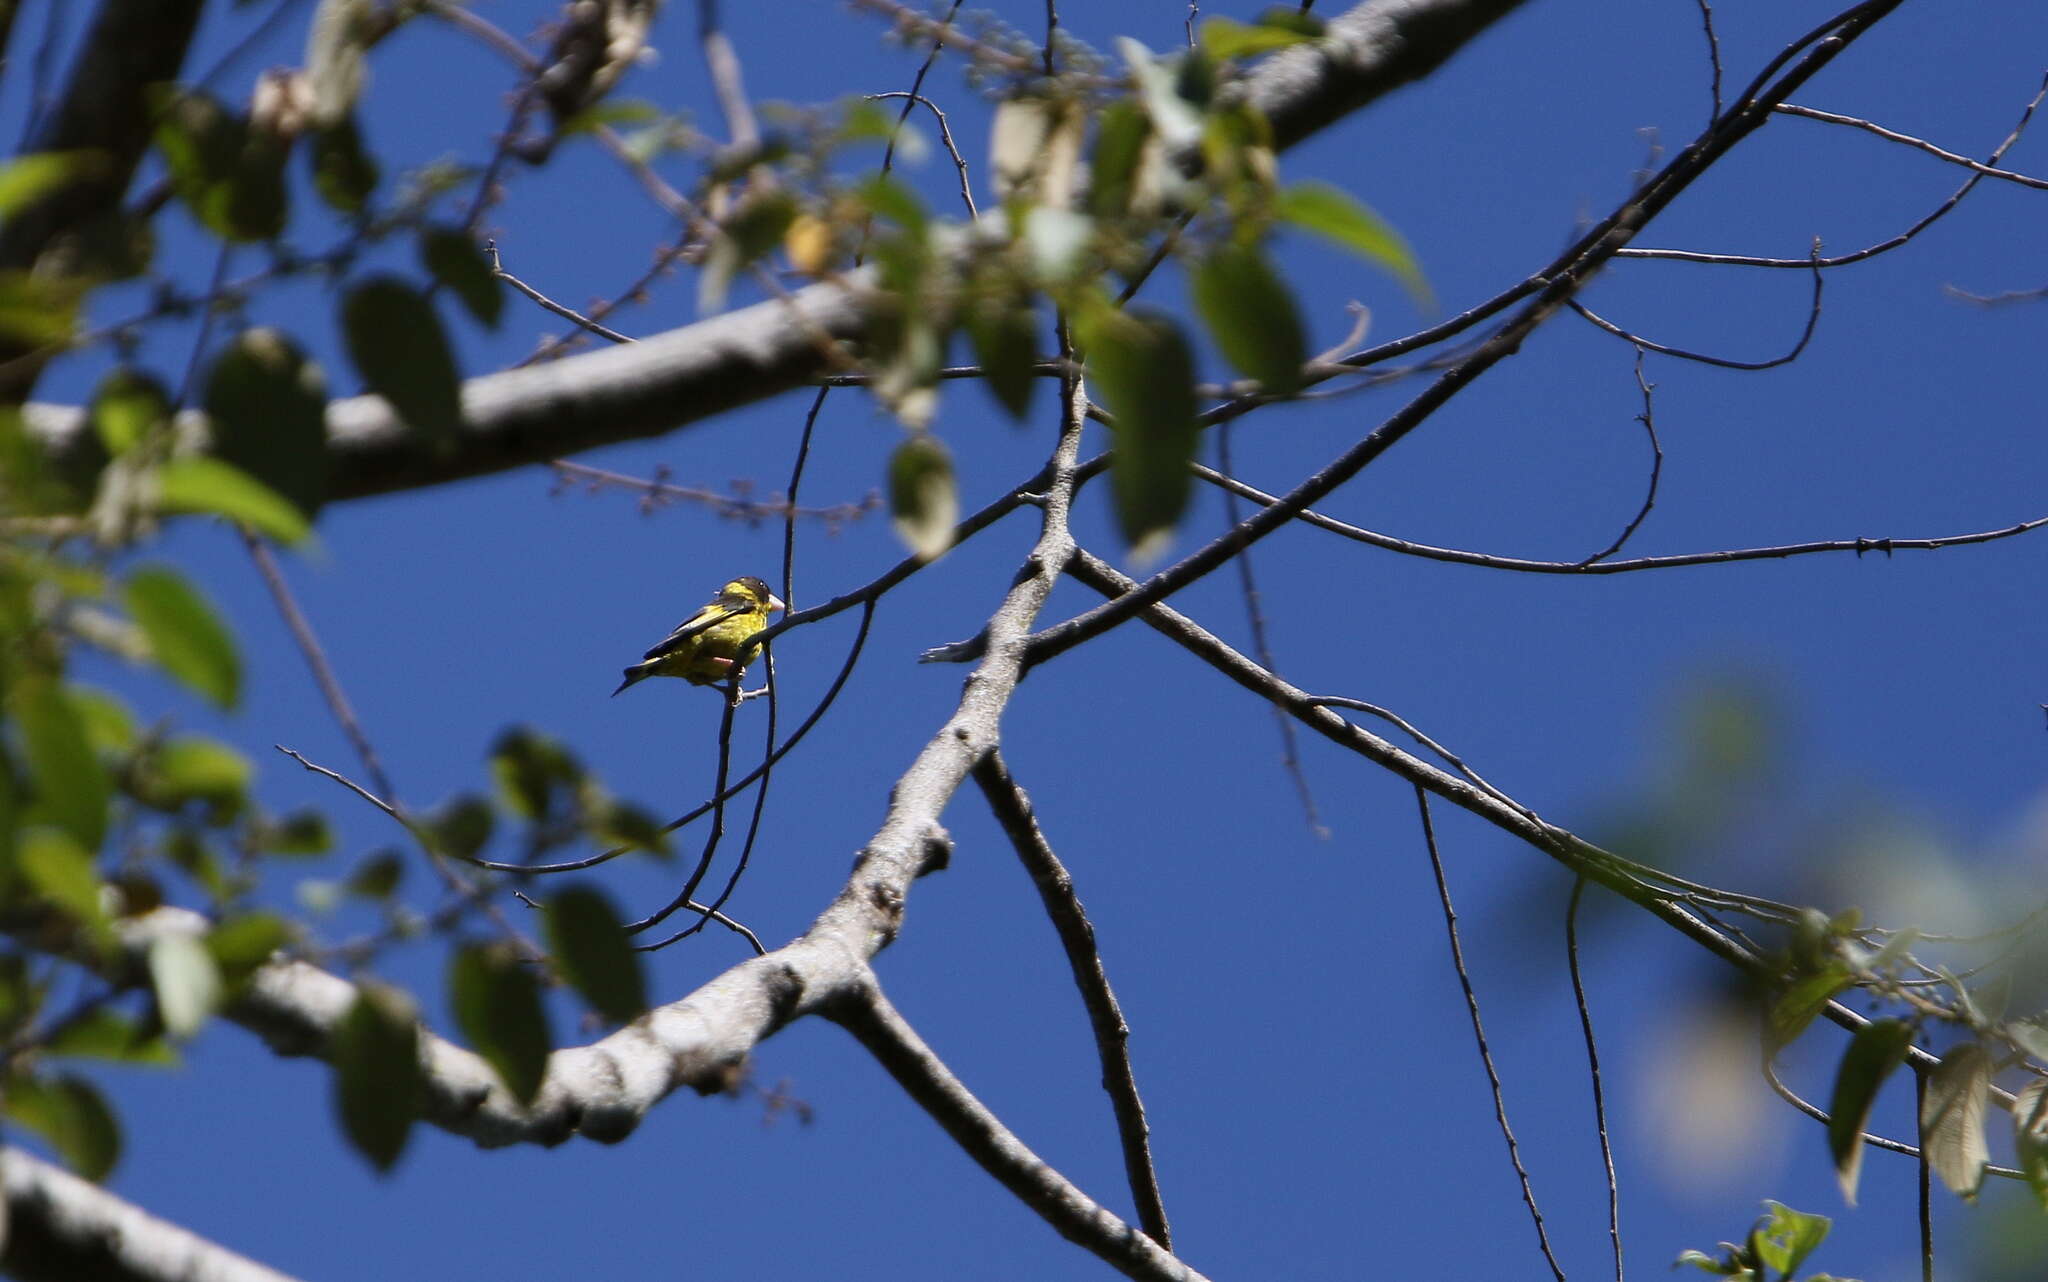 Image of Vietnamese Greenfinch